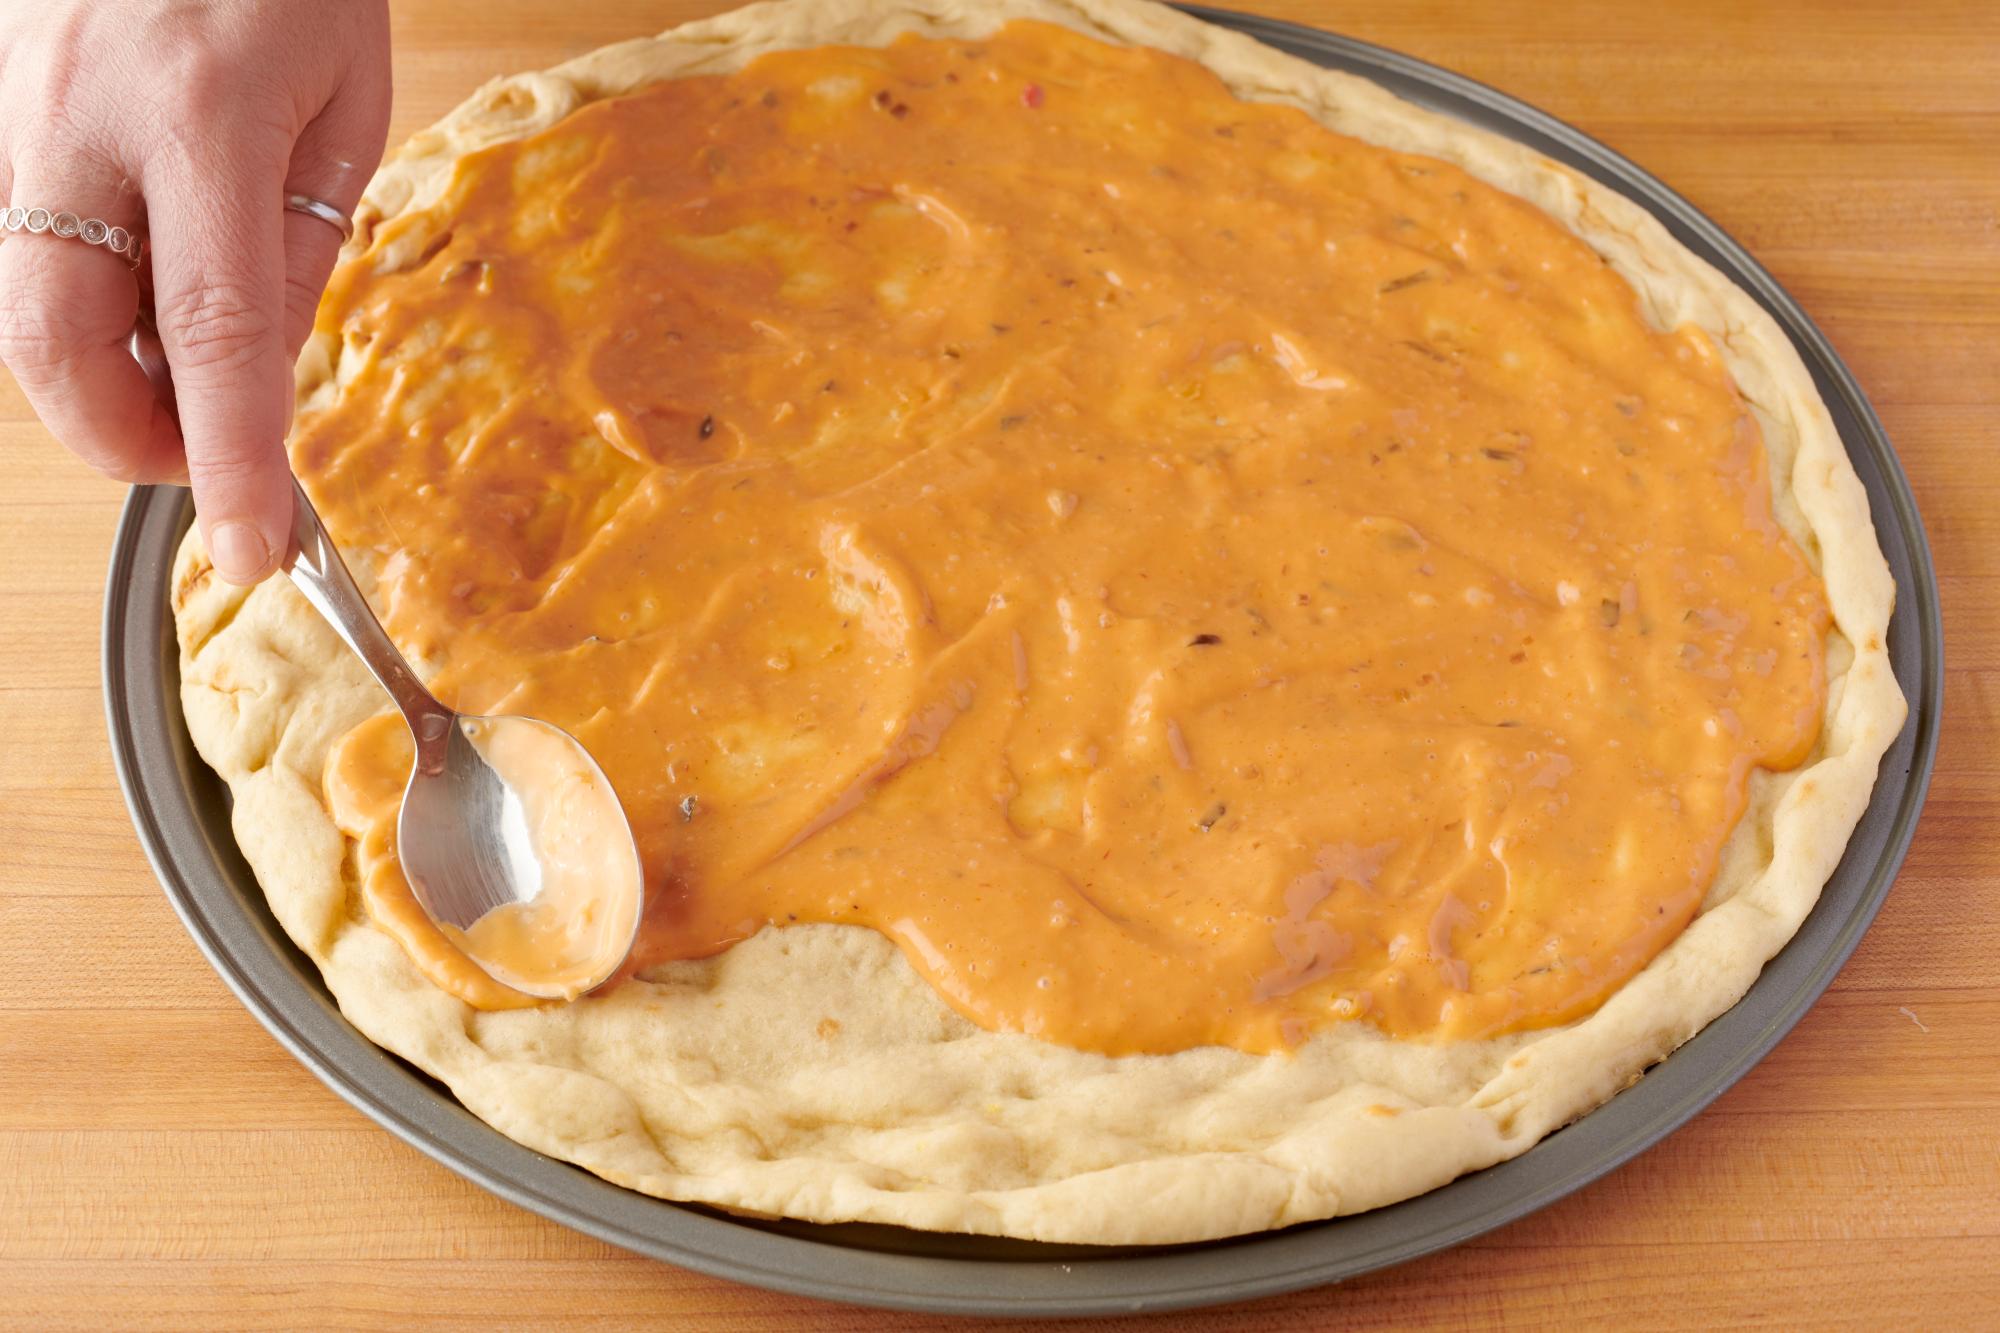 Spread the salad dressing on the crust.